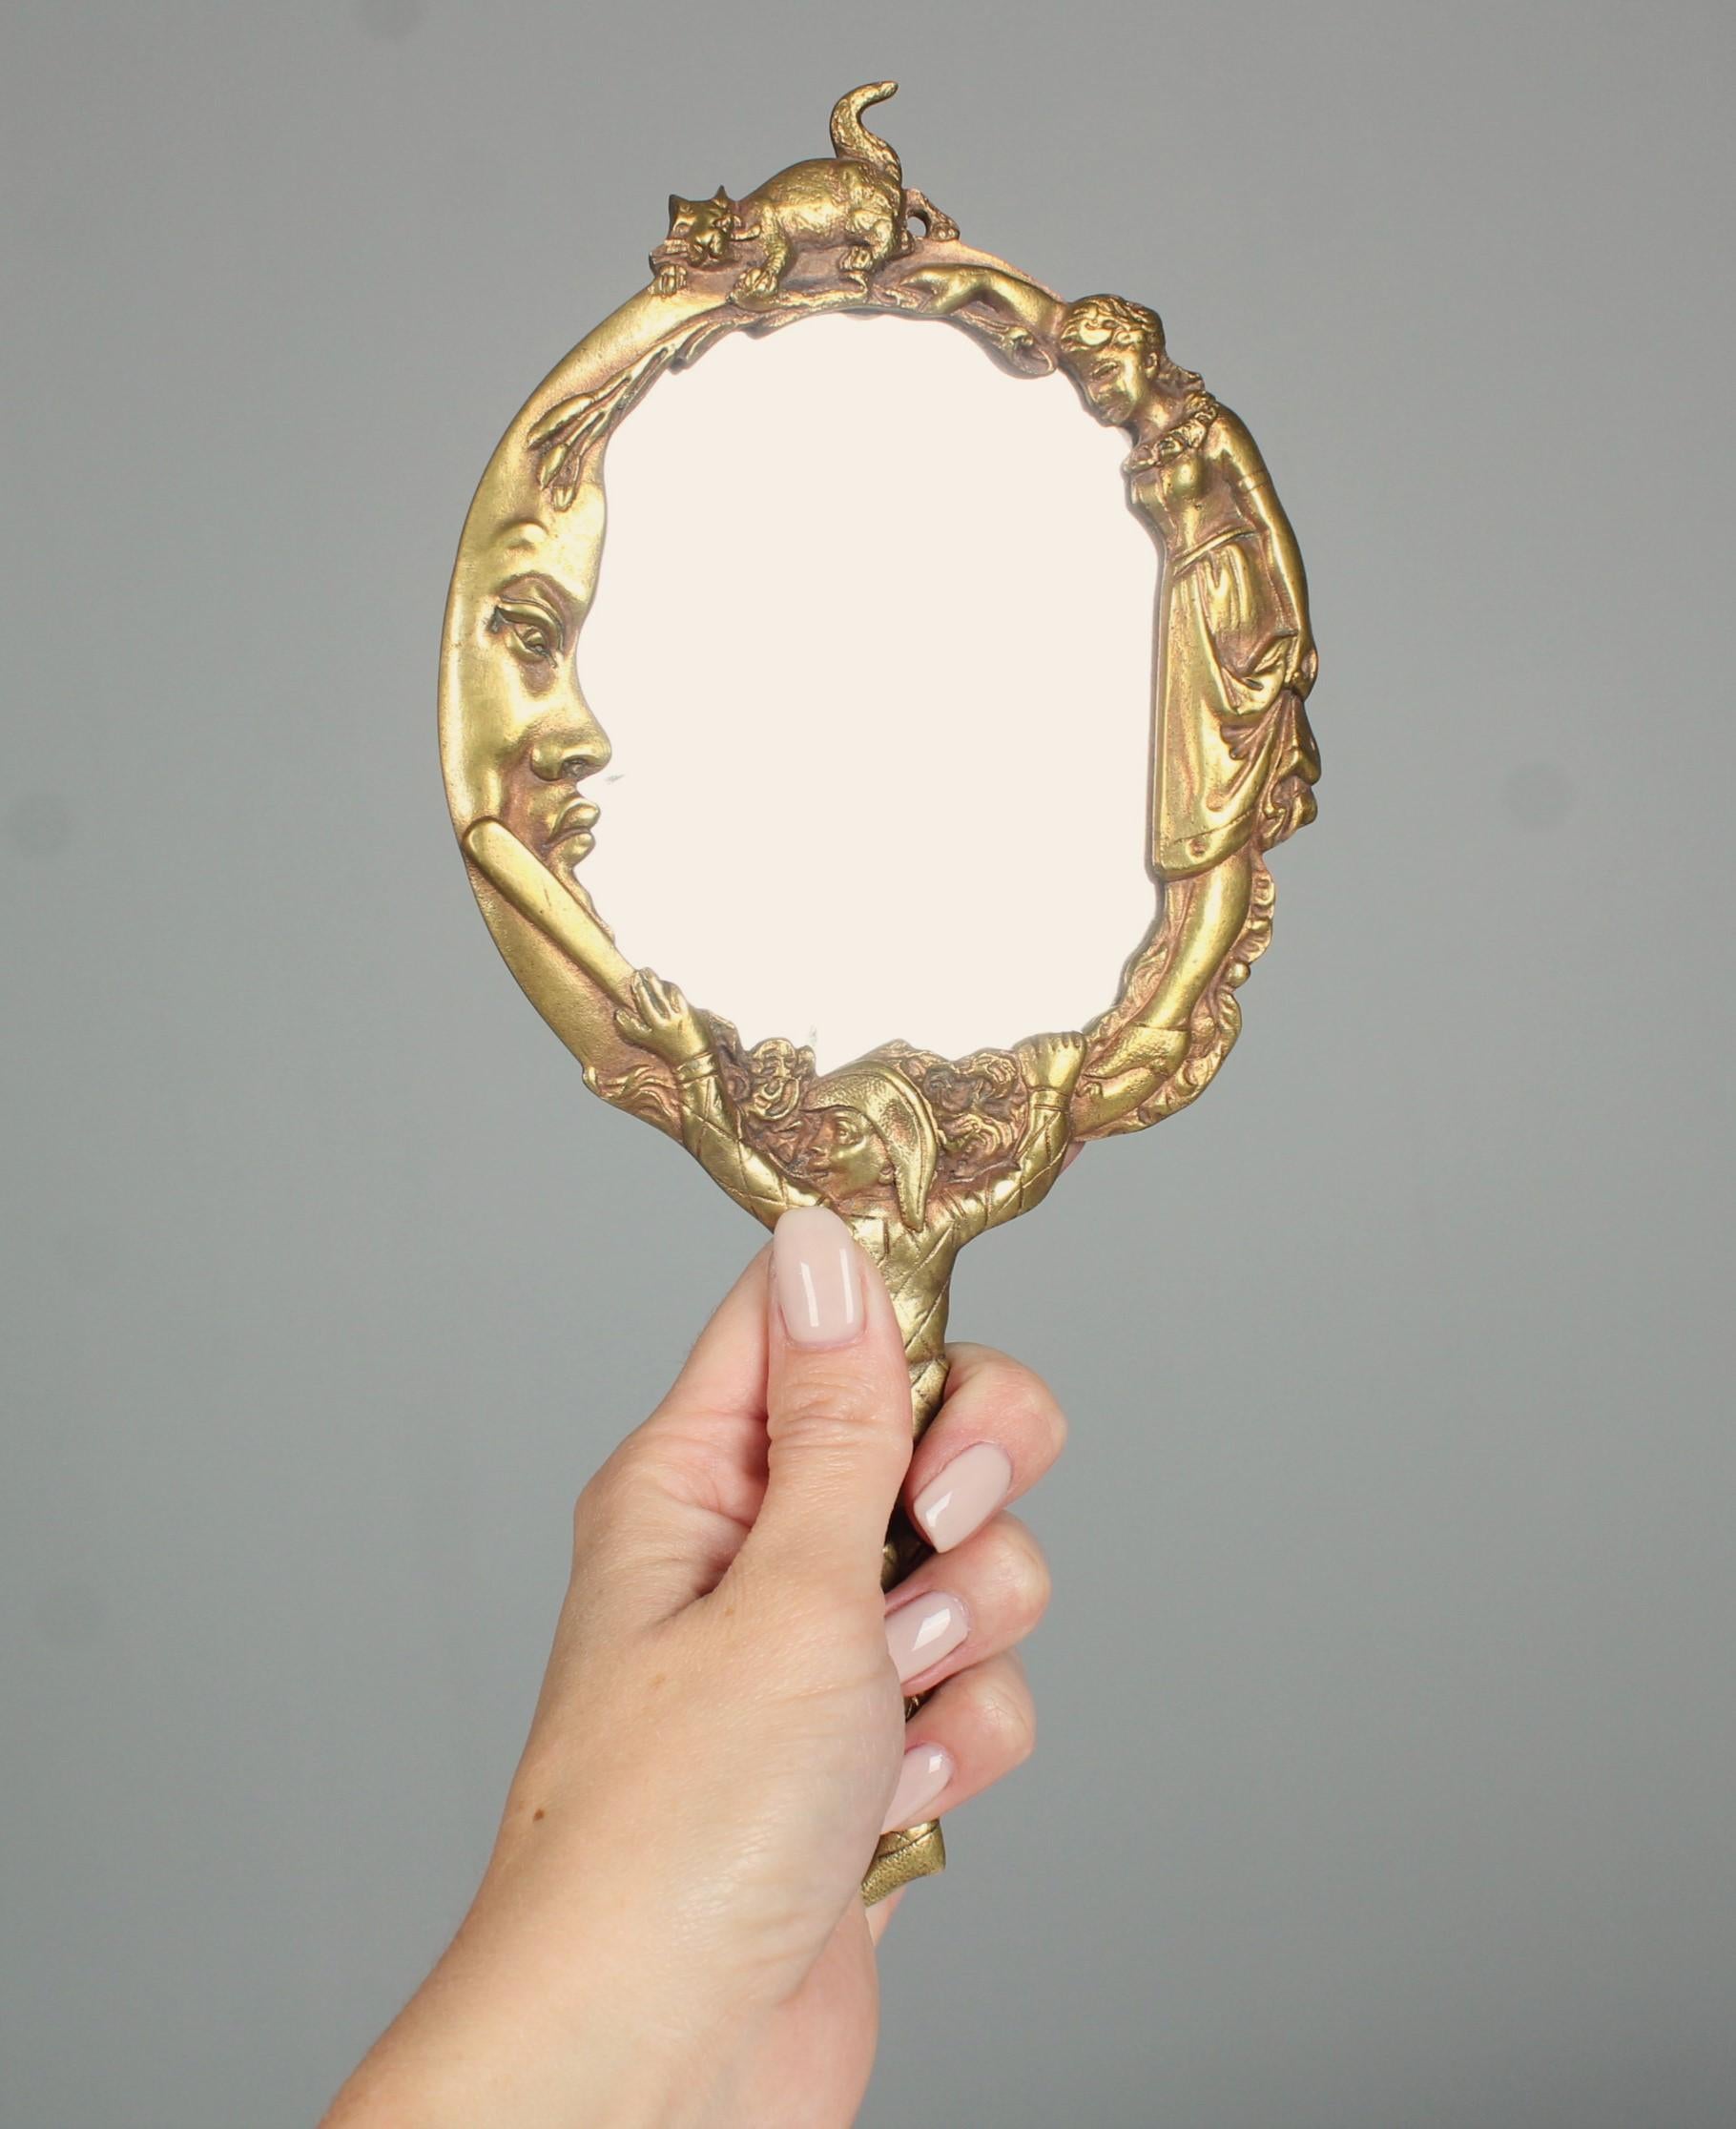 Beautiful antique handheld mirror made of bronze.
Facated mirror with signs of age and use.
Suspension on the back.